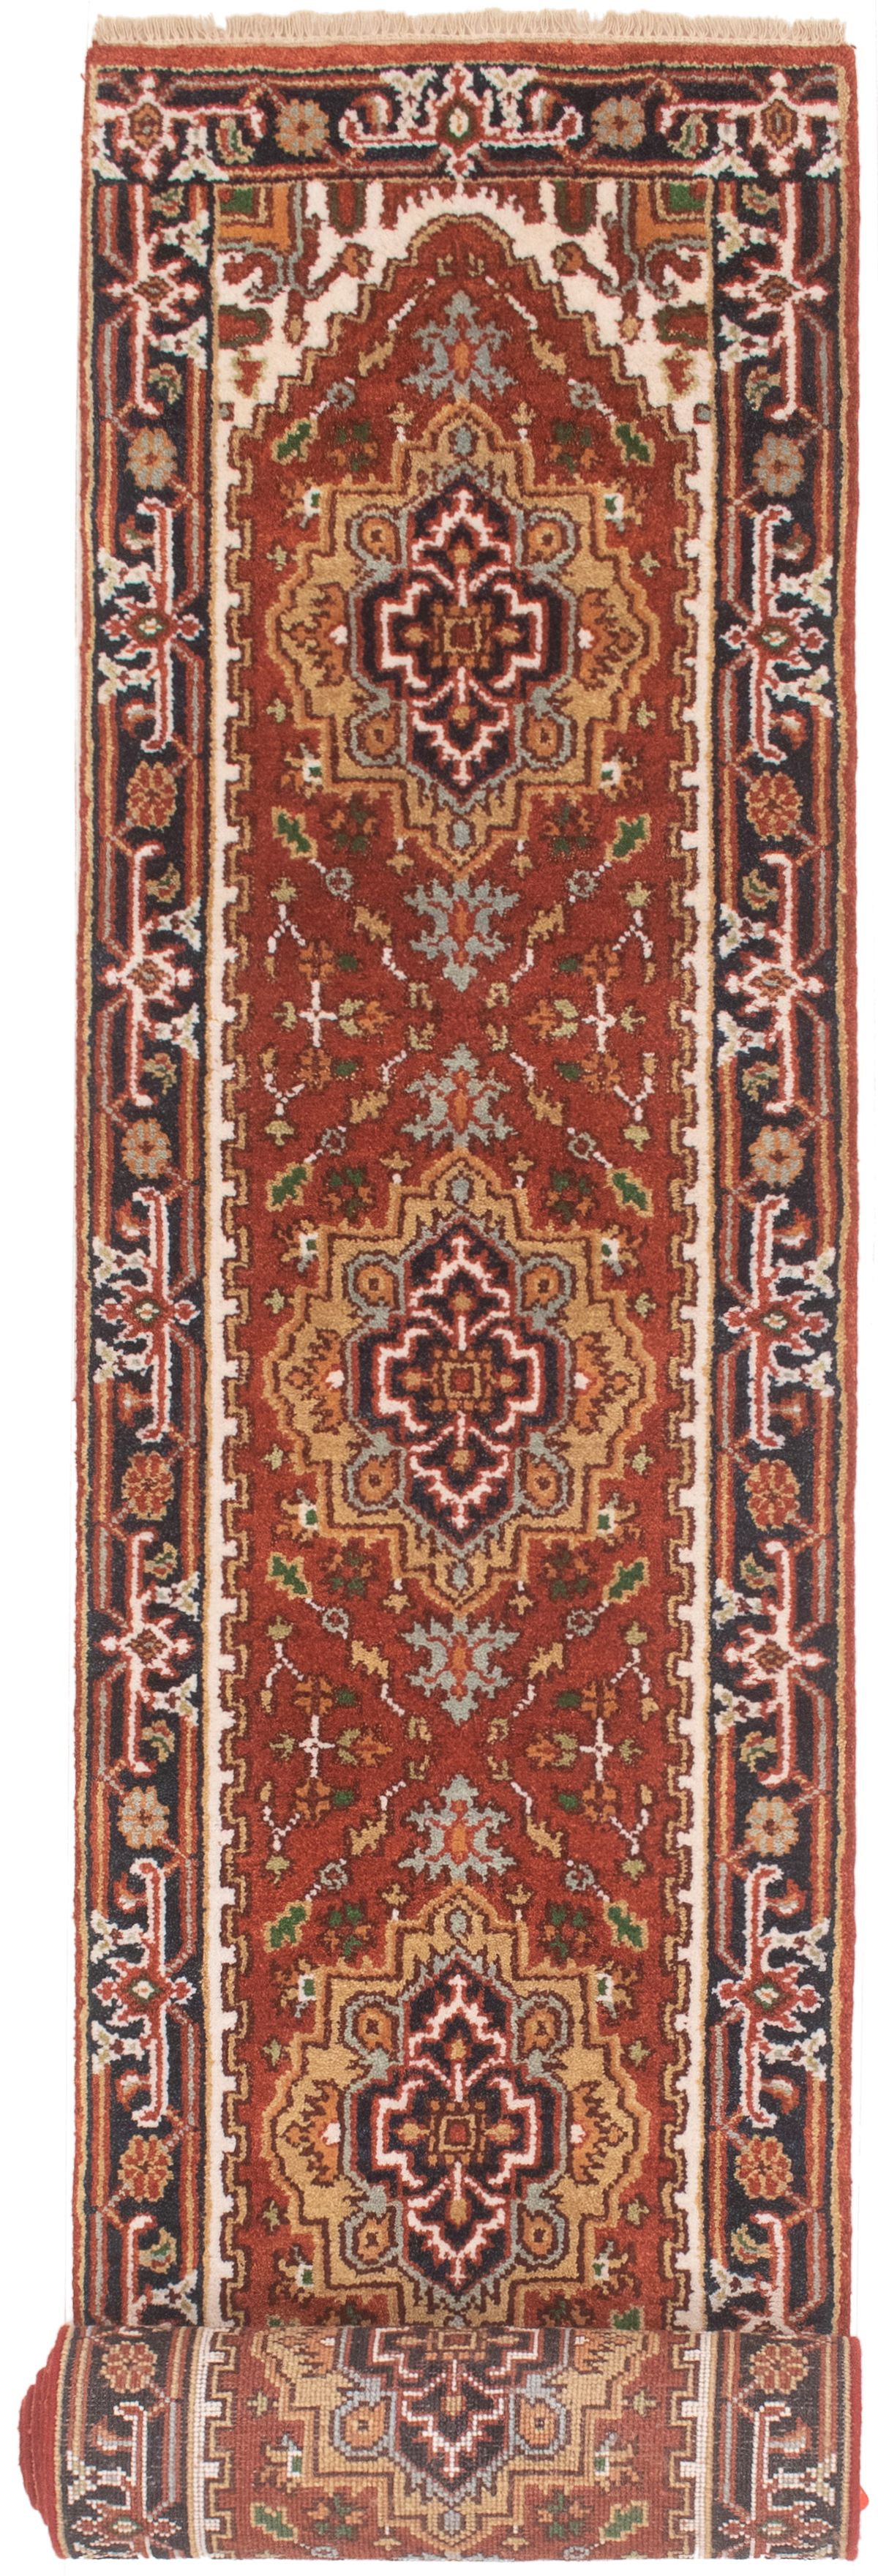 Hand-knotted Serapi Heritage Copper Wool Rug 2'6" x 15'9" Size: 2'6" x 15'9"  